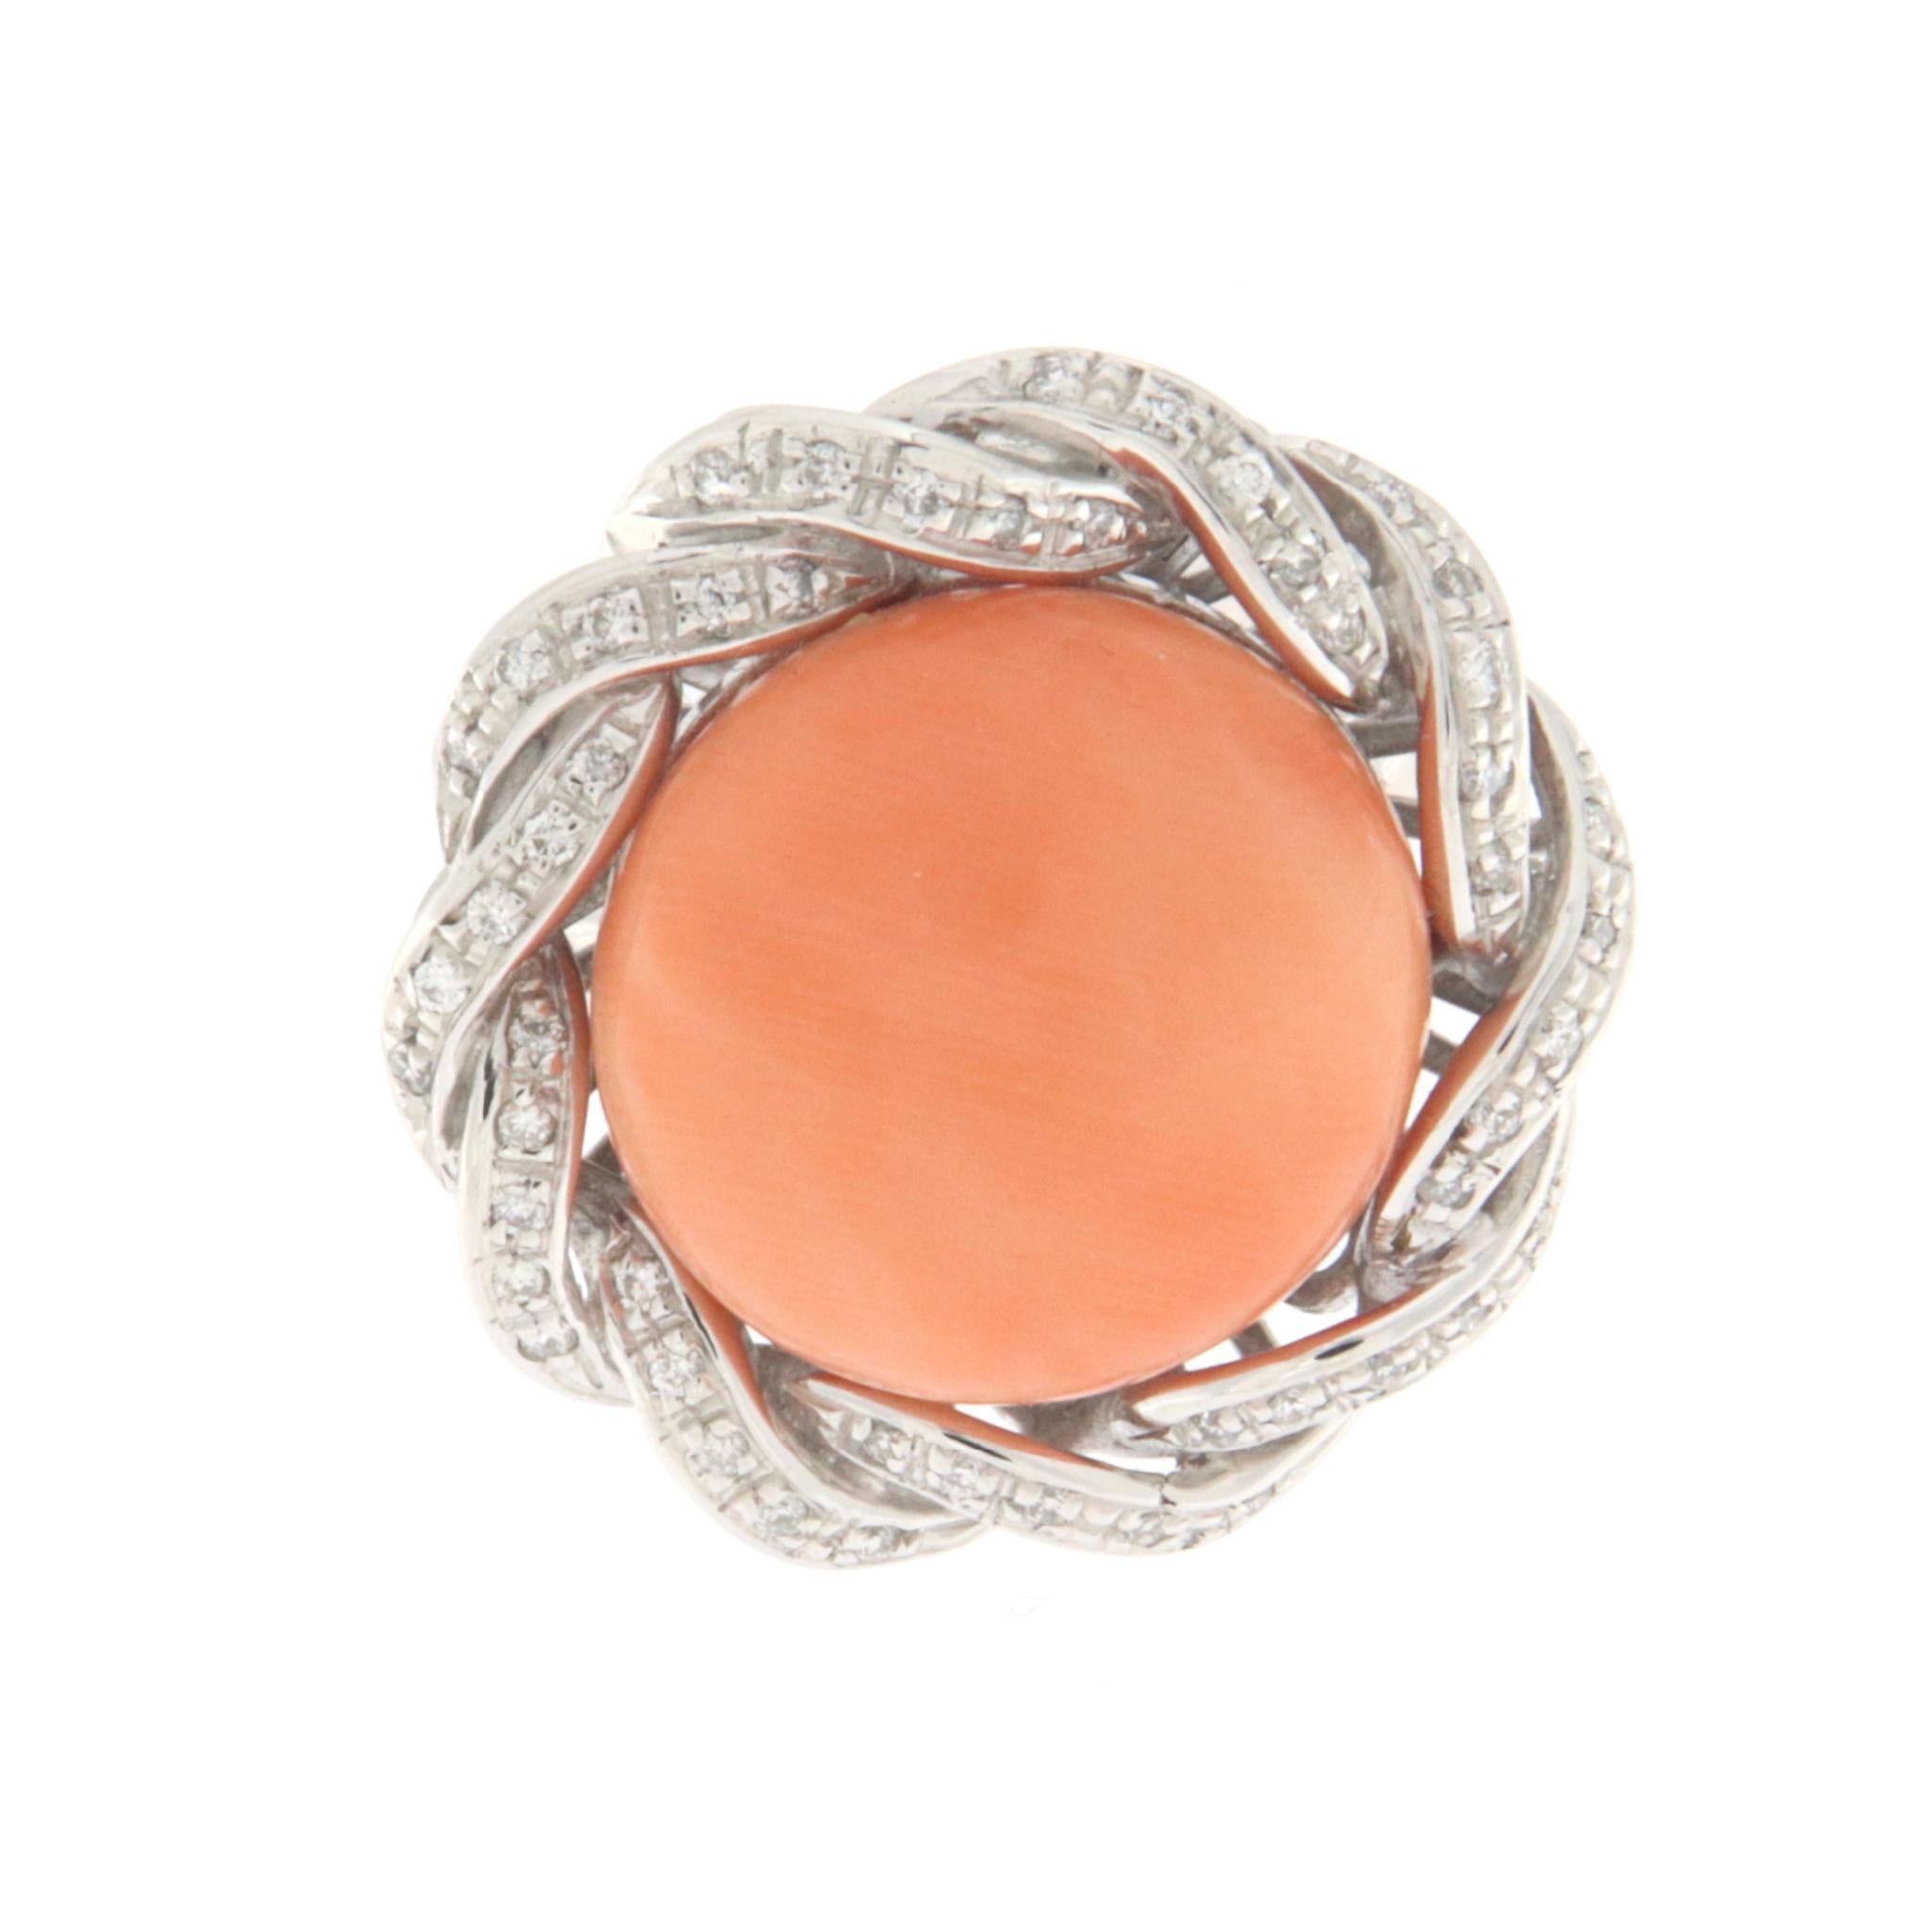 This elegant 18-karat white gold ring embodies contemporary sophistication, enriched by radiant diamonds masterfully framing a central natural coral, meticulously cut into a round, button-like shape. The choice of coral in a vibrant orange hue not